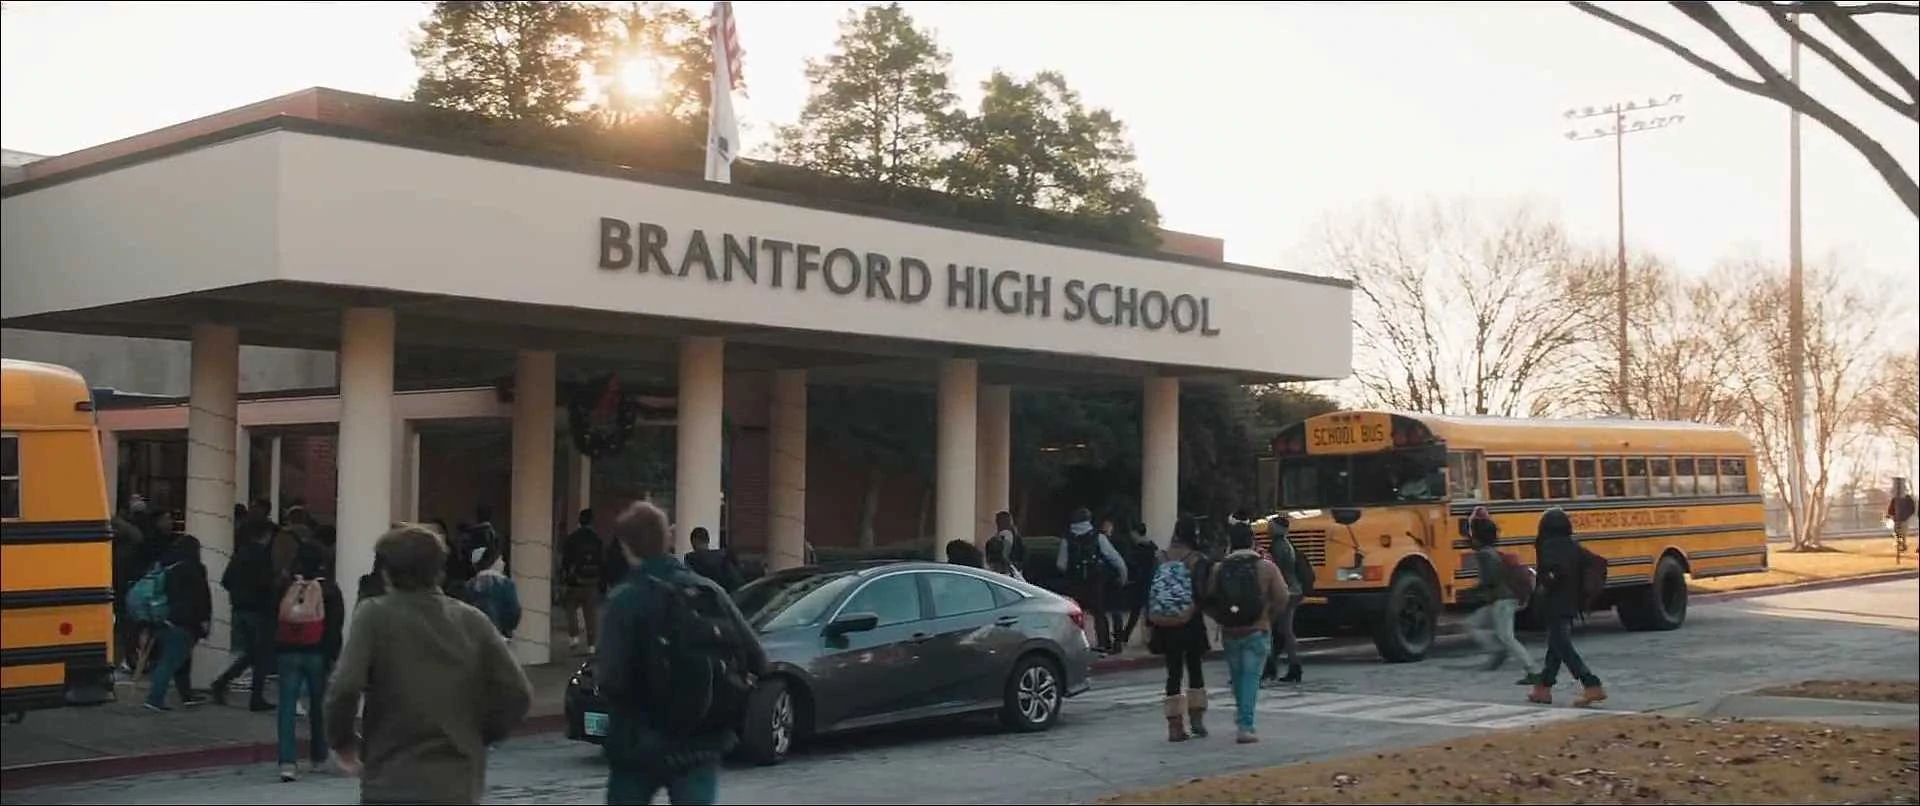 Brantford High School at the start of the film (Credits: Columbia Pictures)